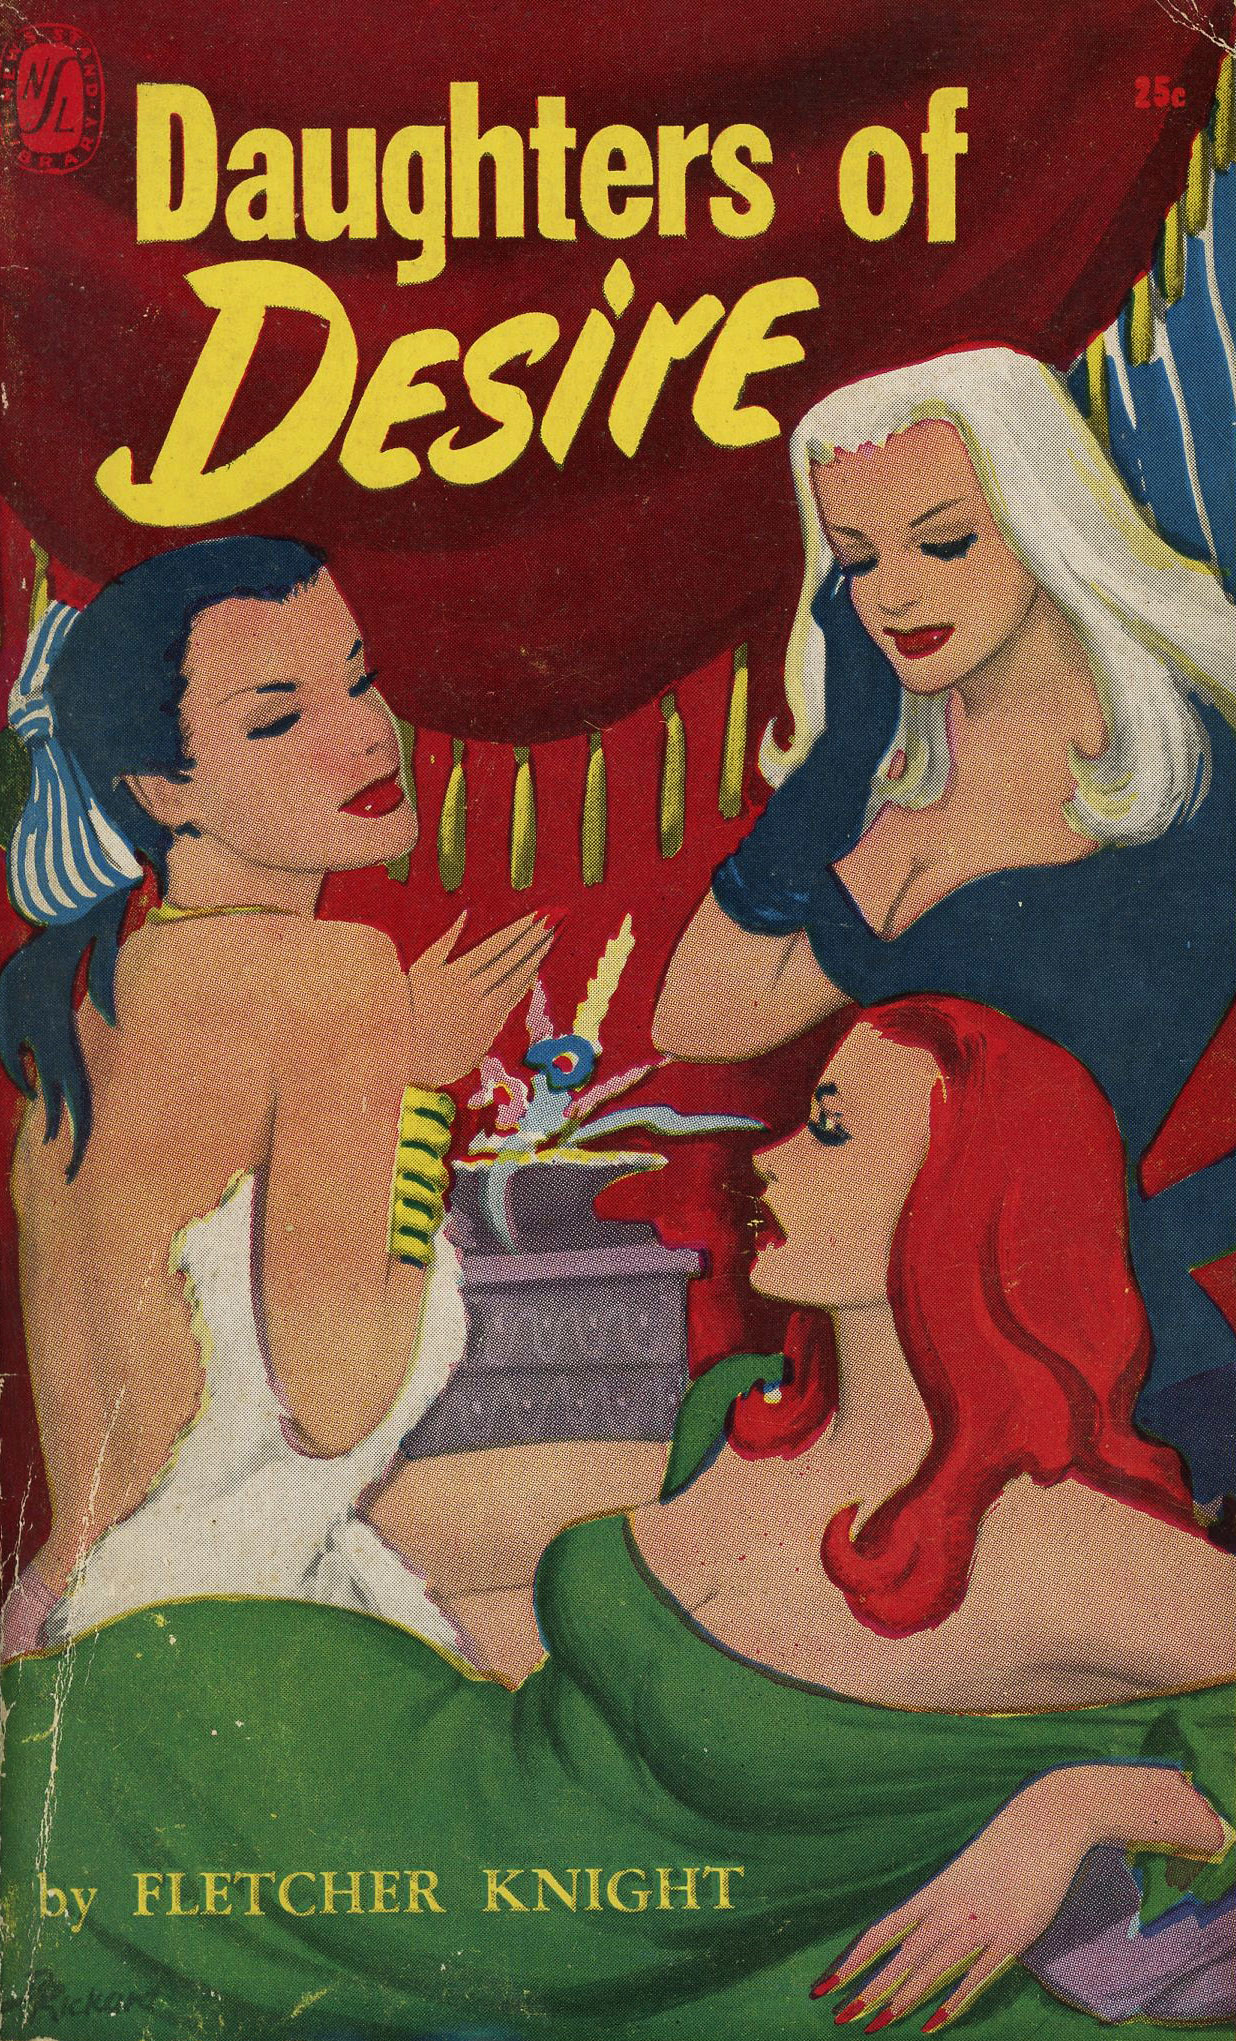 6367328905-news-stand-library-16-a-fletcher-knight-daughters-of-desire